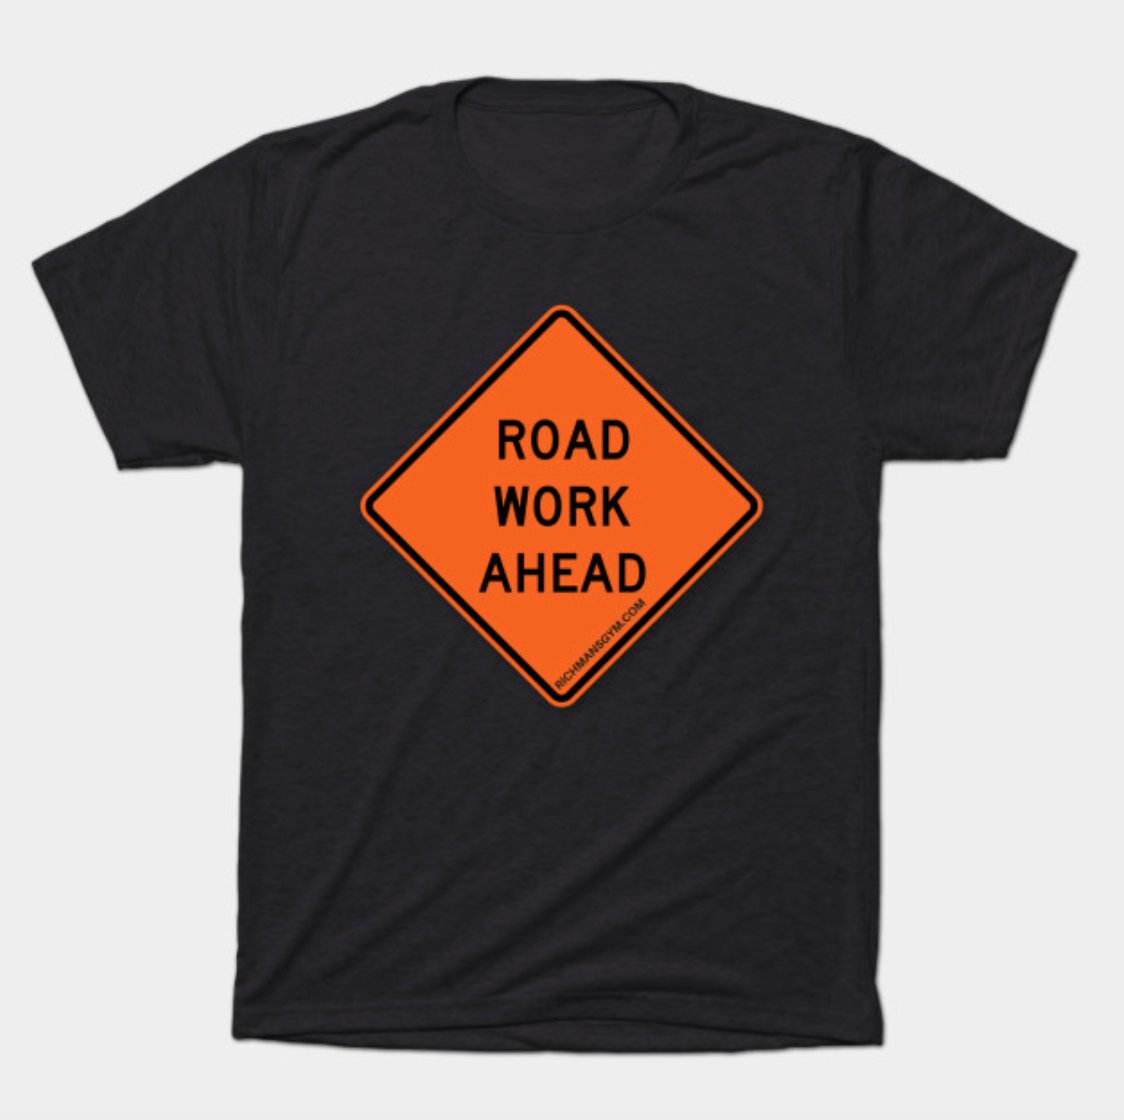 #GetAfterIt Road work is standard operating procedure in your business.  Whether you're into boxing, traditional martial arts or MMA, let the world know you're putting in the work to be the best!  bit.ly/RoadWorkAhead